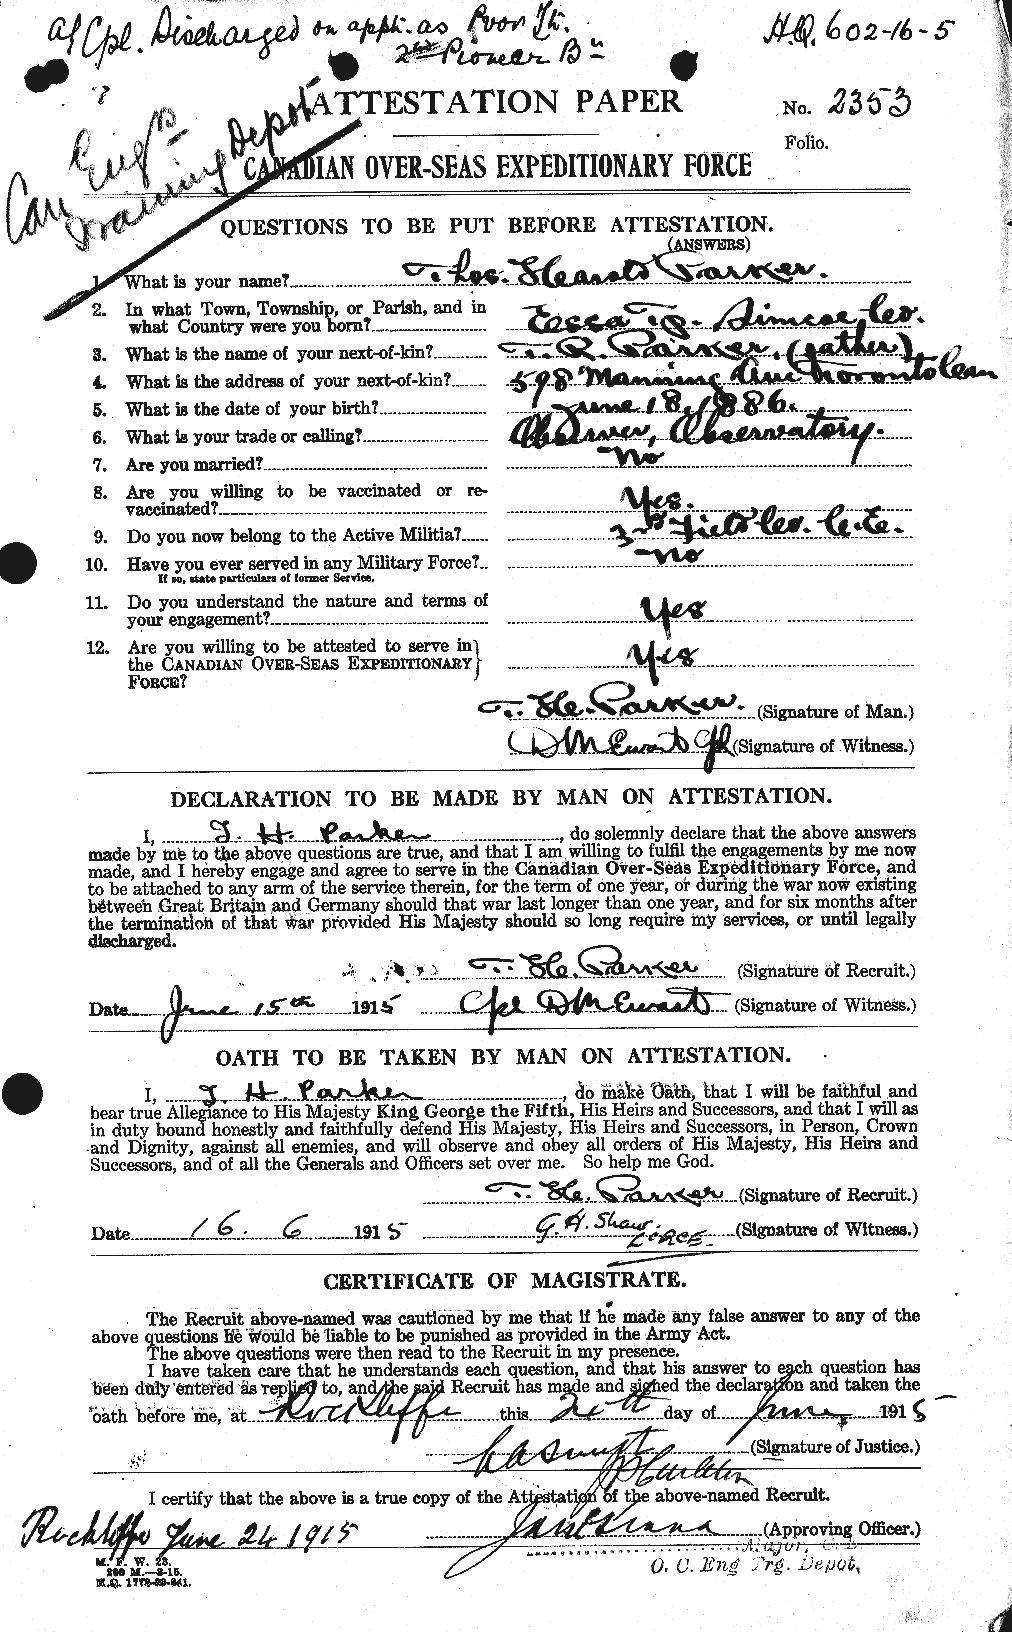 Personnel Records of the First World War - CEF 565666a